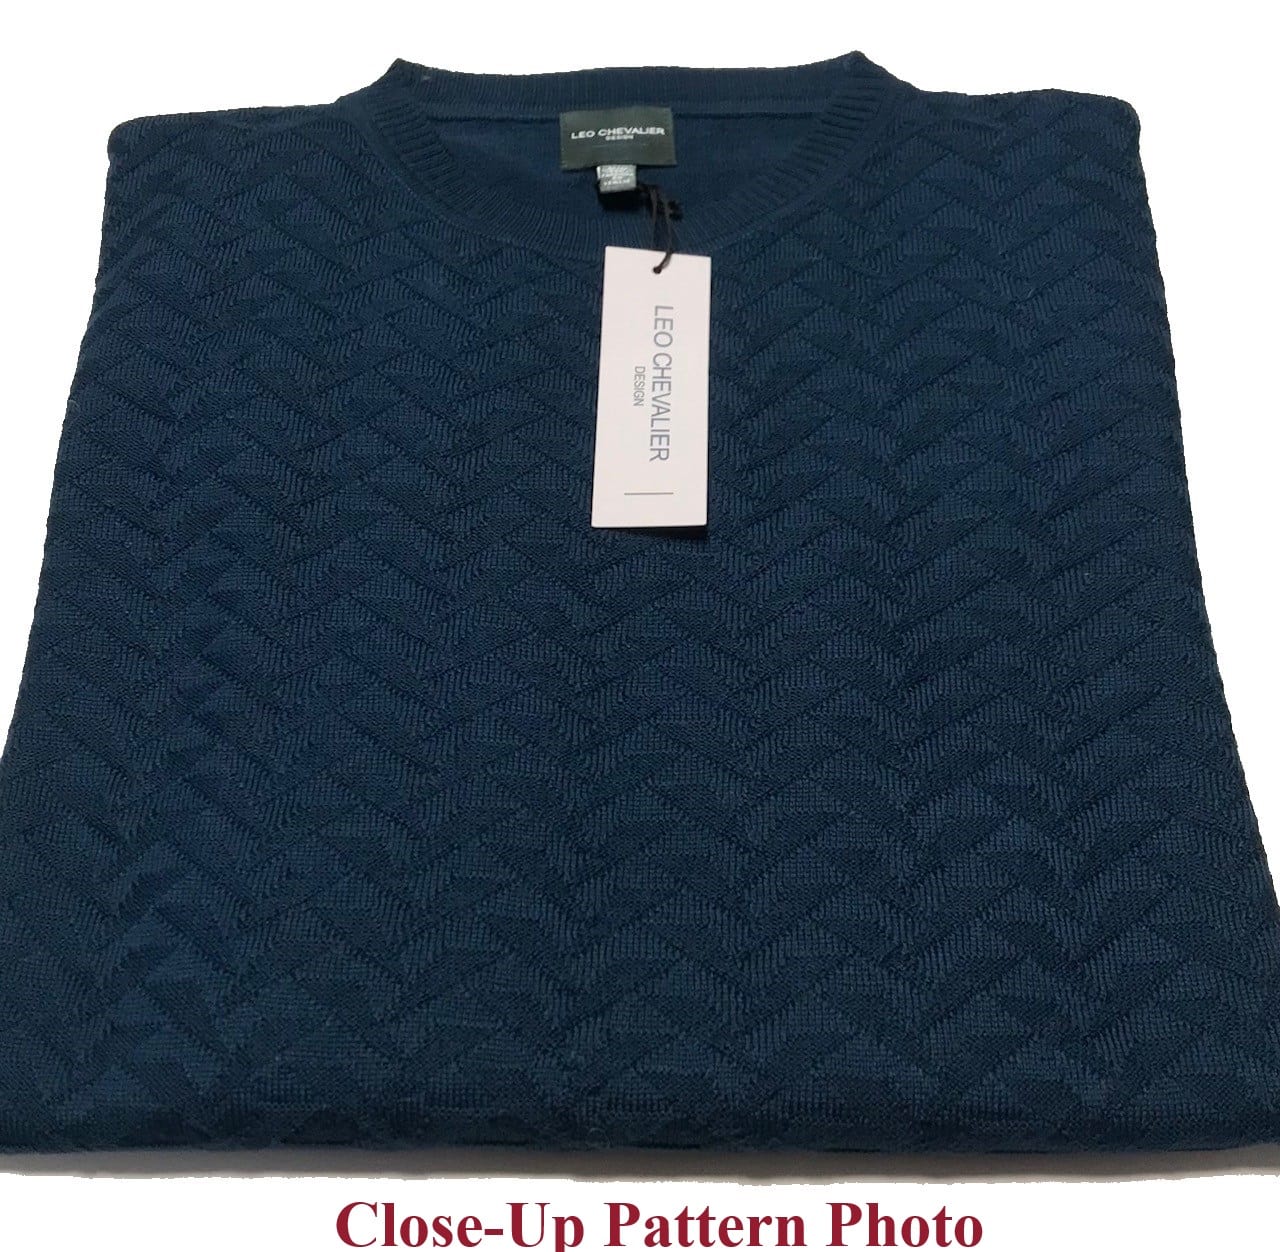 Leo Chevalier Design Mens Merino Wool Crewneck Sweater - Made In Italy | Embrace Three Exquisite Colors